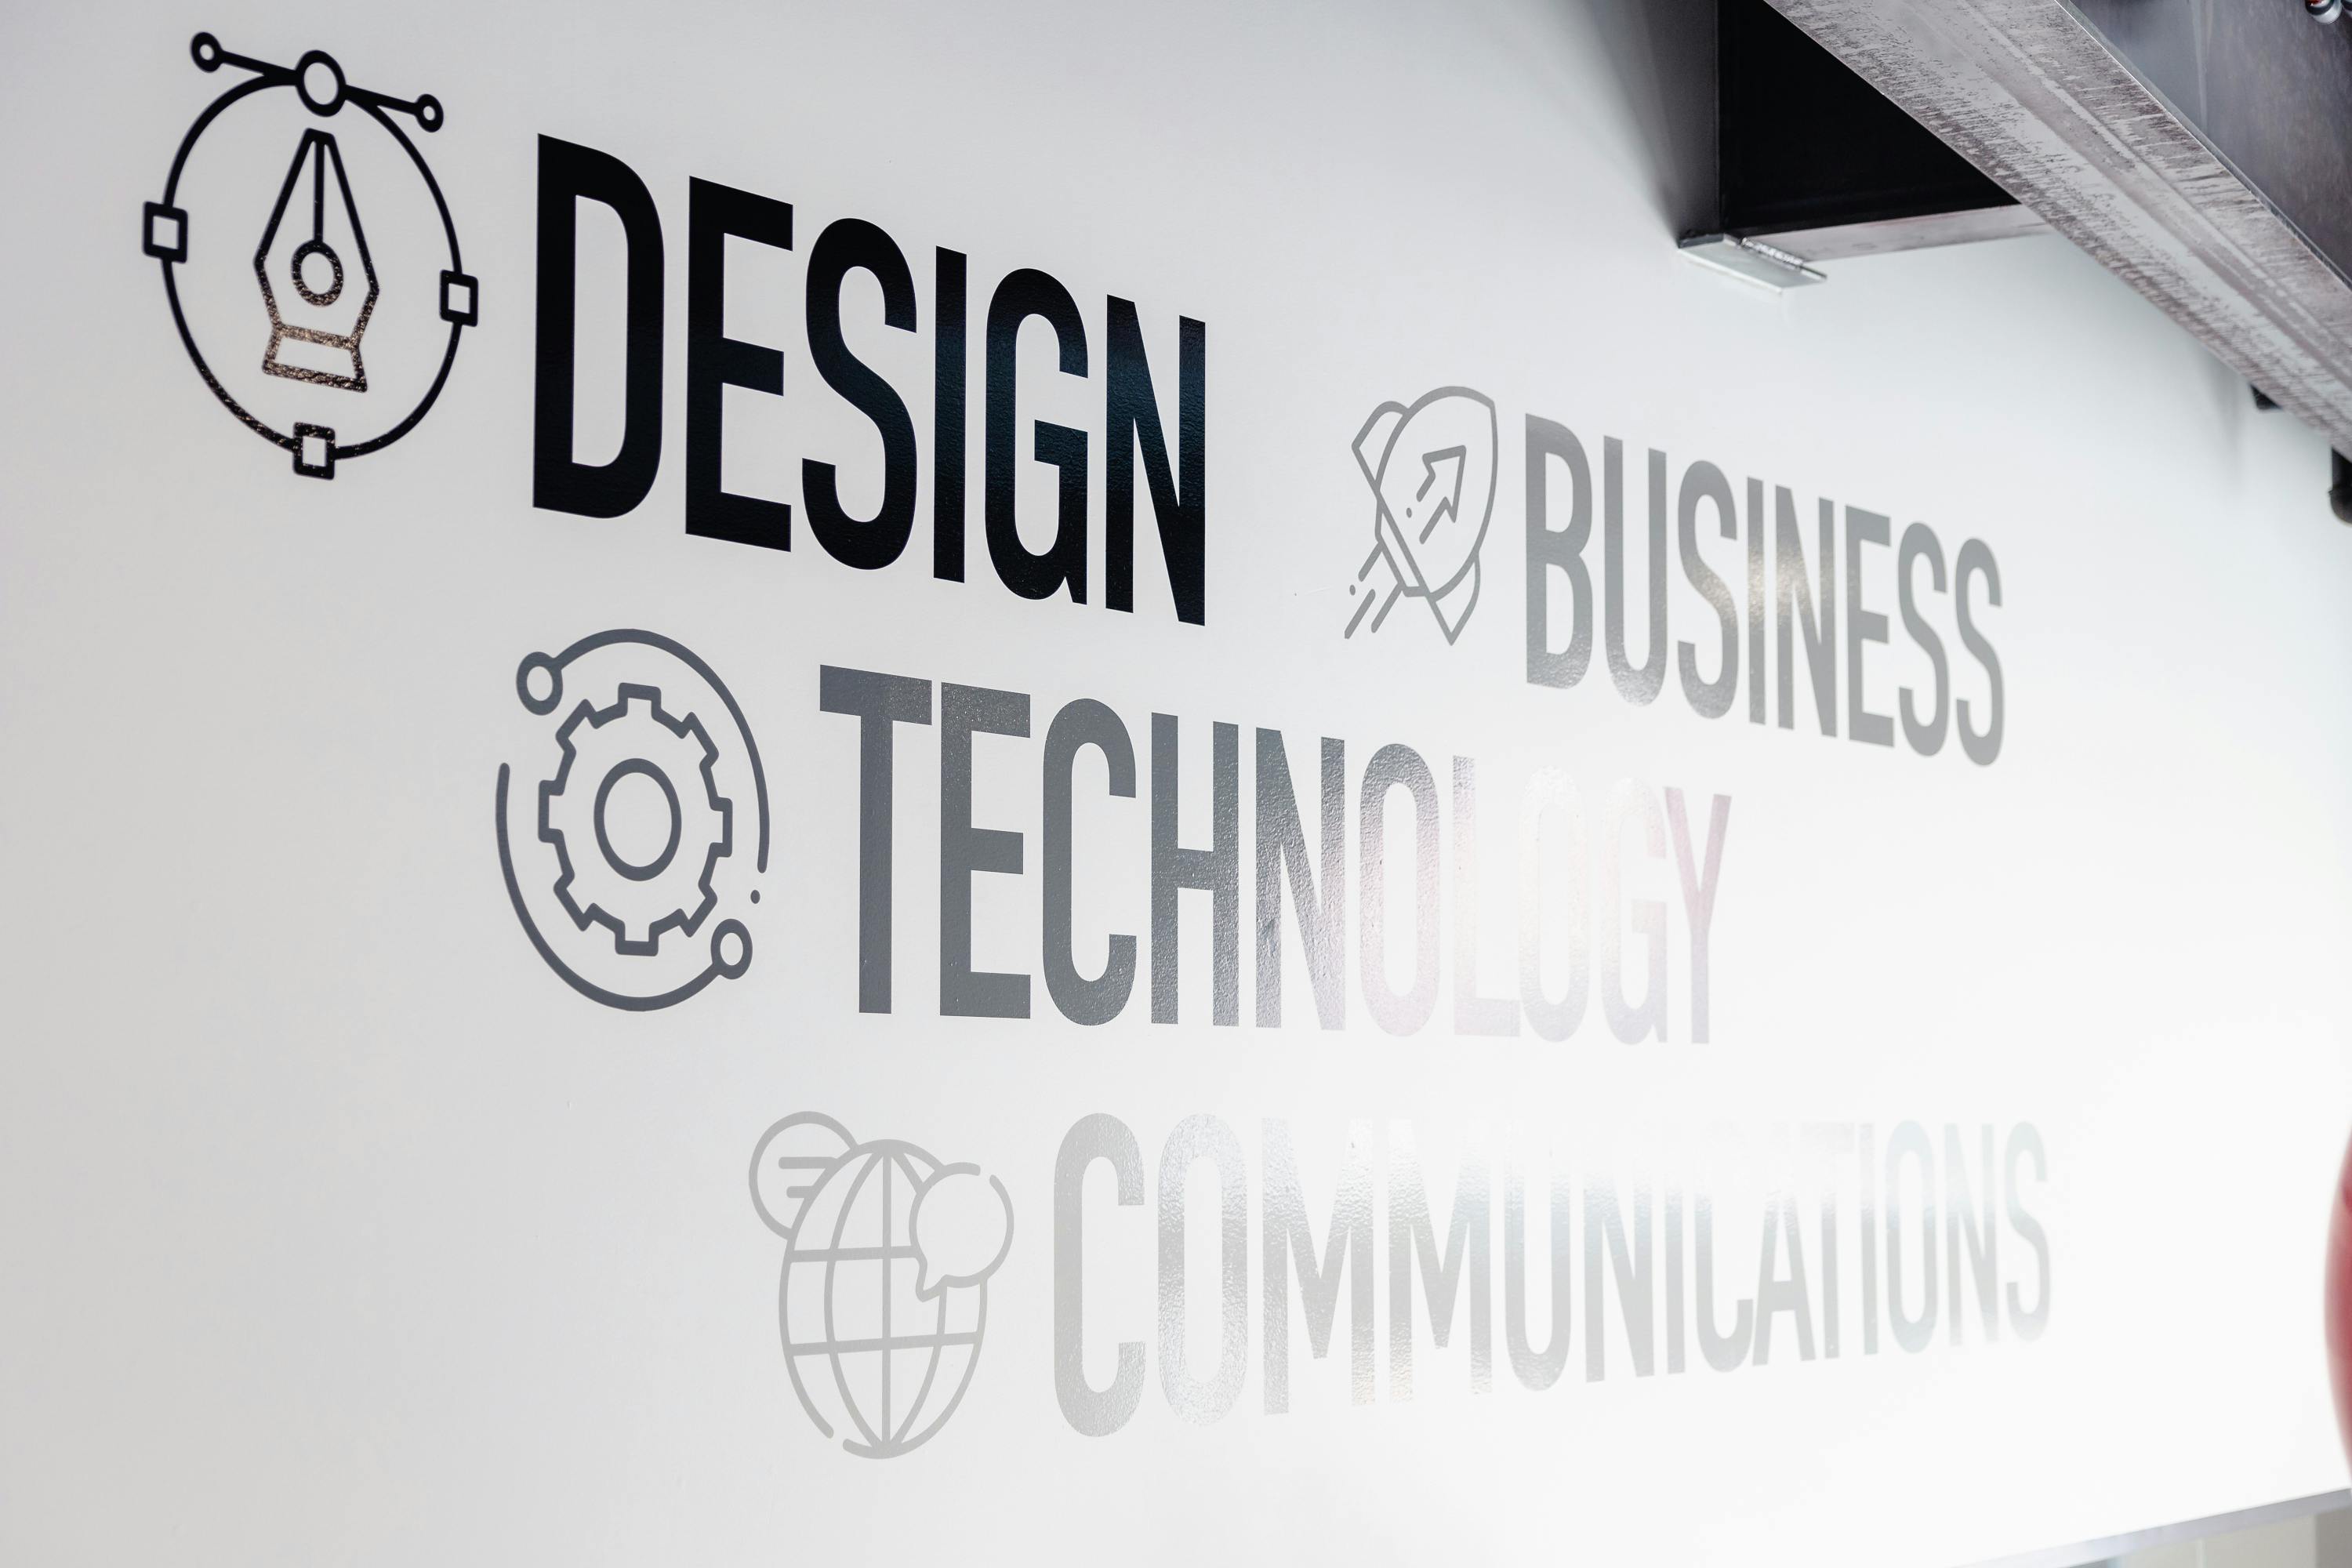 The words "Design, Business, Technology, Communications," each with an icon beside them, are written in bold black font on a white wall